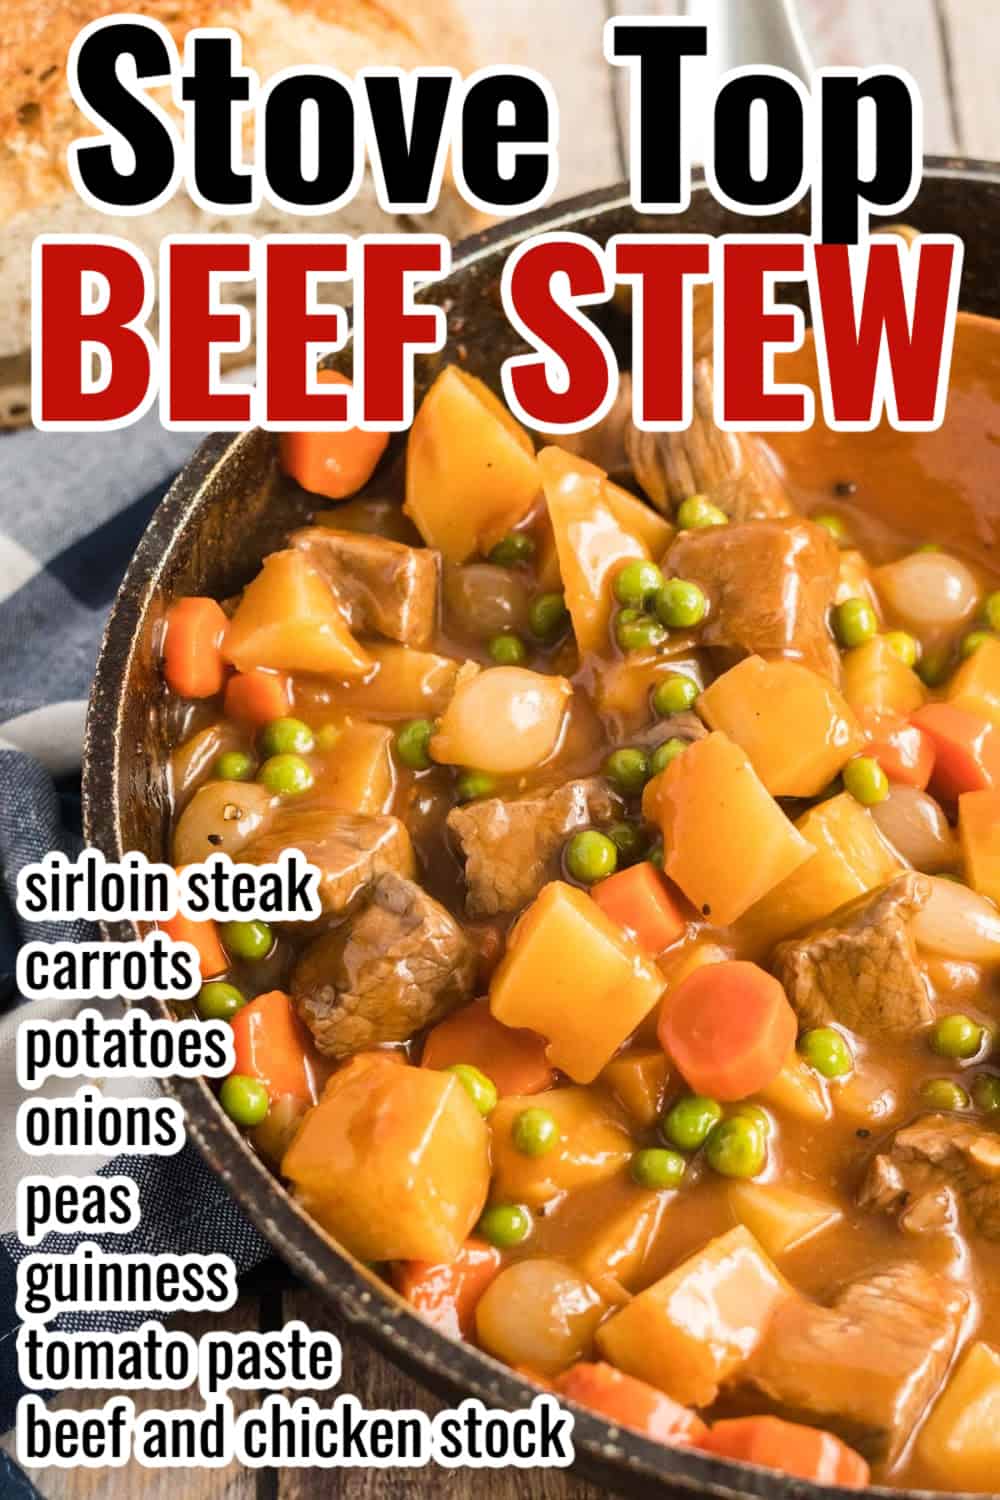 stove top beef stew in a skillet with a wooden spoon, and recipe name overlaid in text.